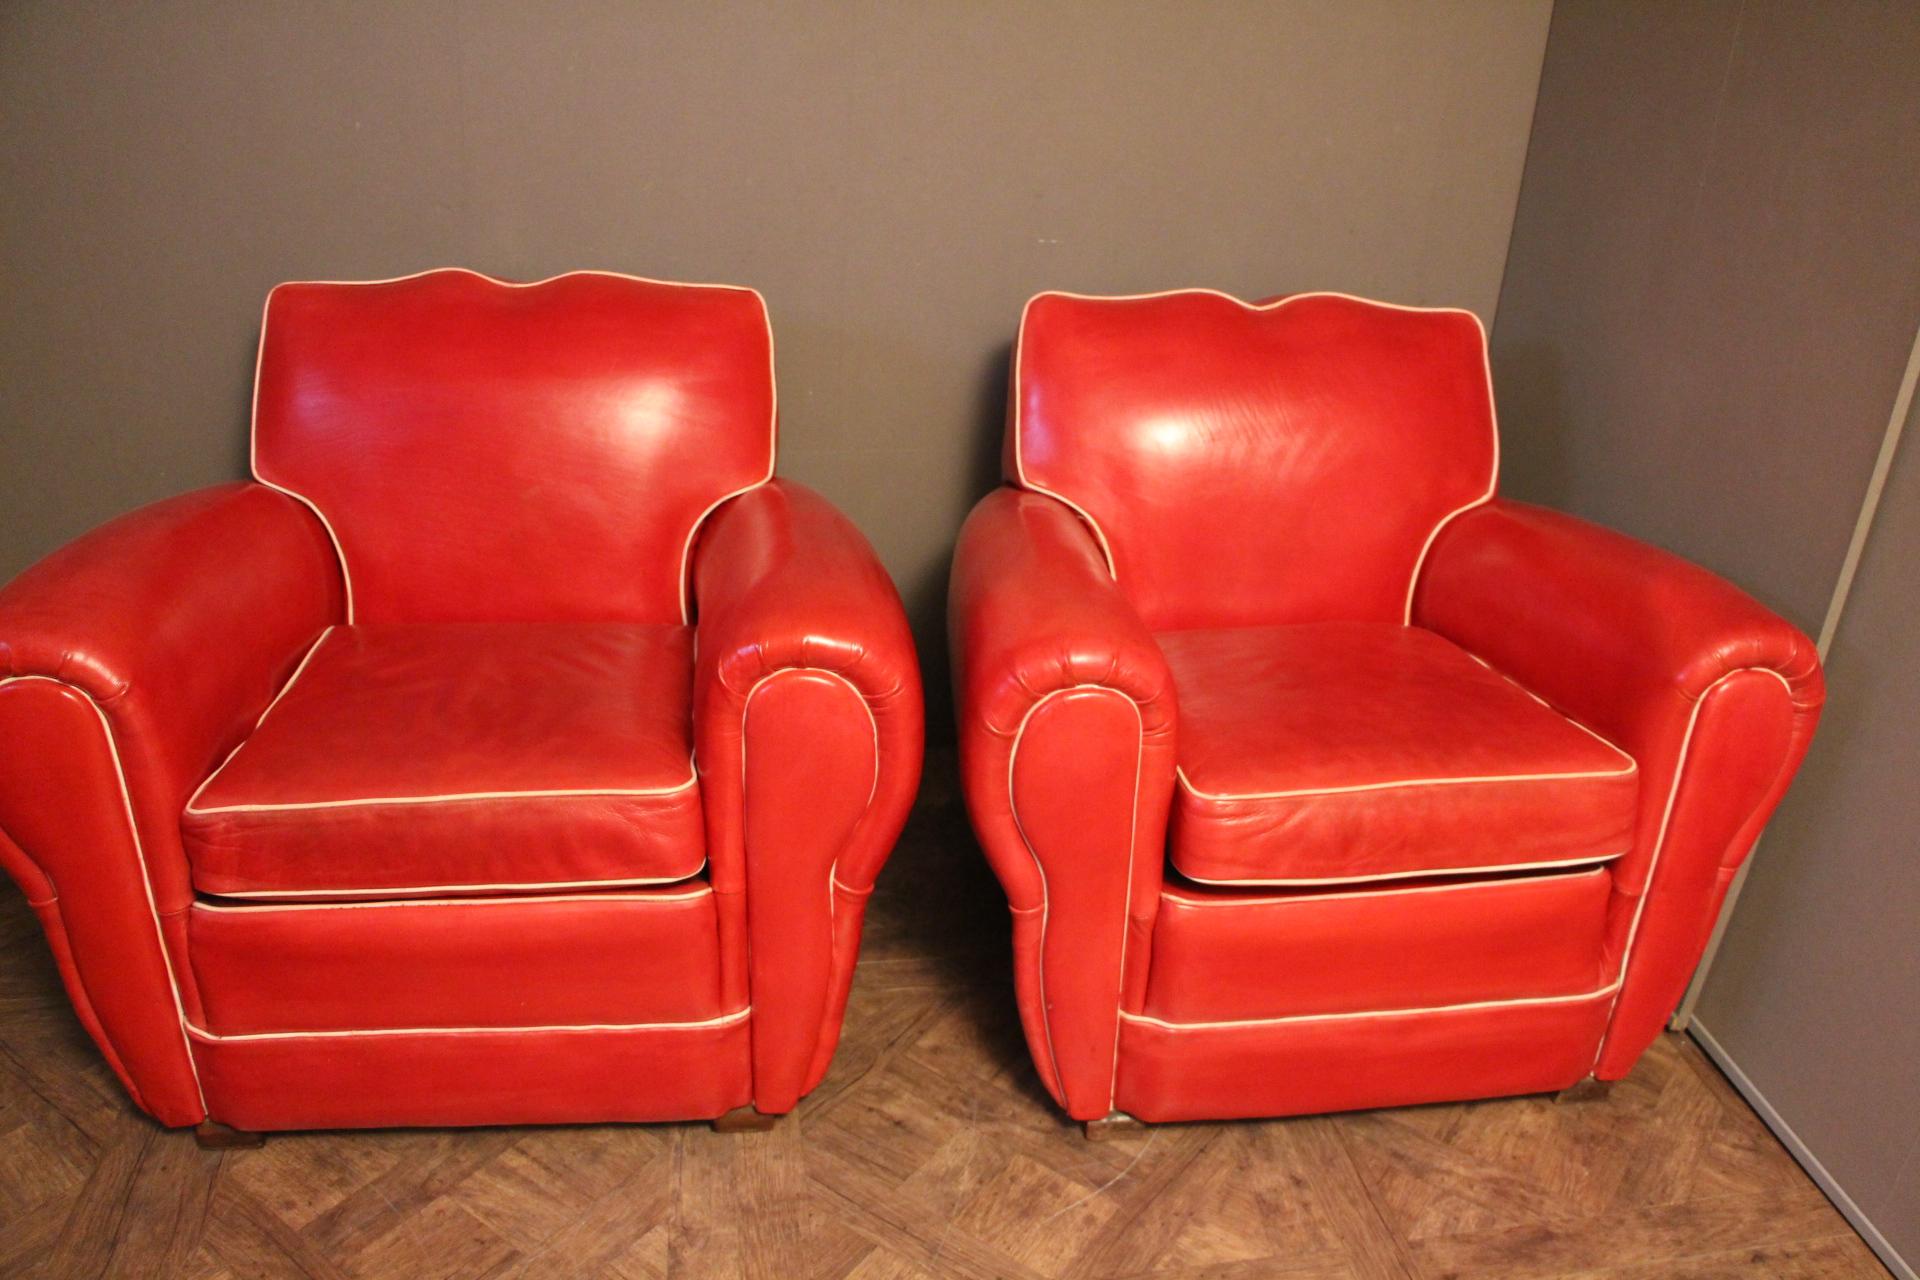 This pair of French club chairs features a vibrant poppy red color and a very nice mustache shaped back.
Separate seat cushions (new foam).White leather trim around and studs all around their backs.
They are perfectly original and in very good